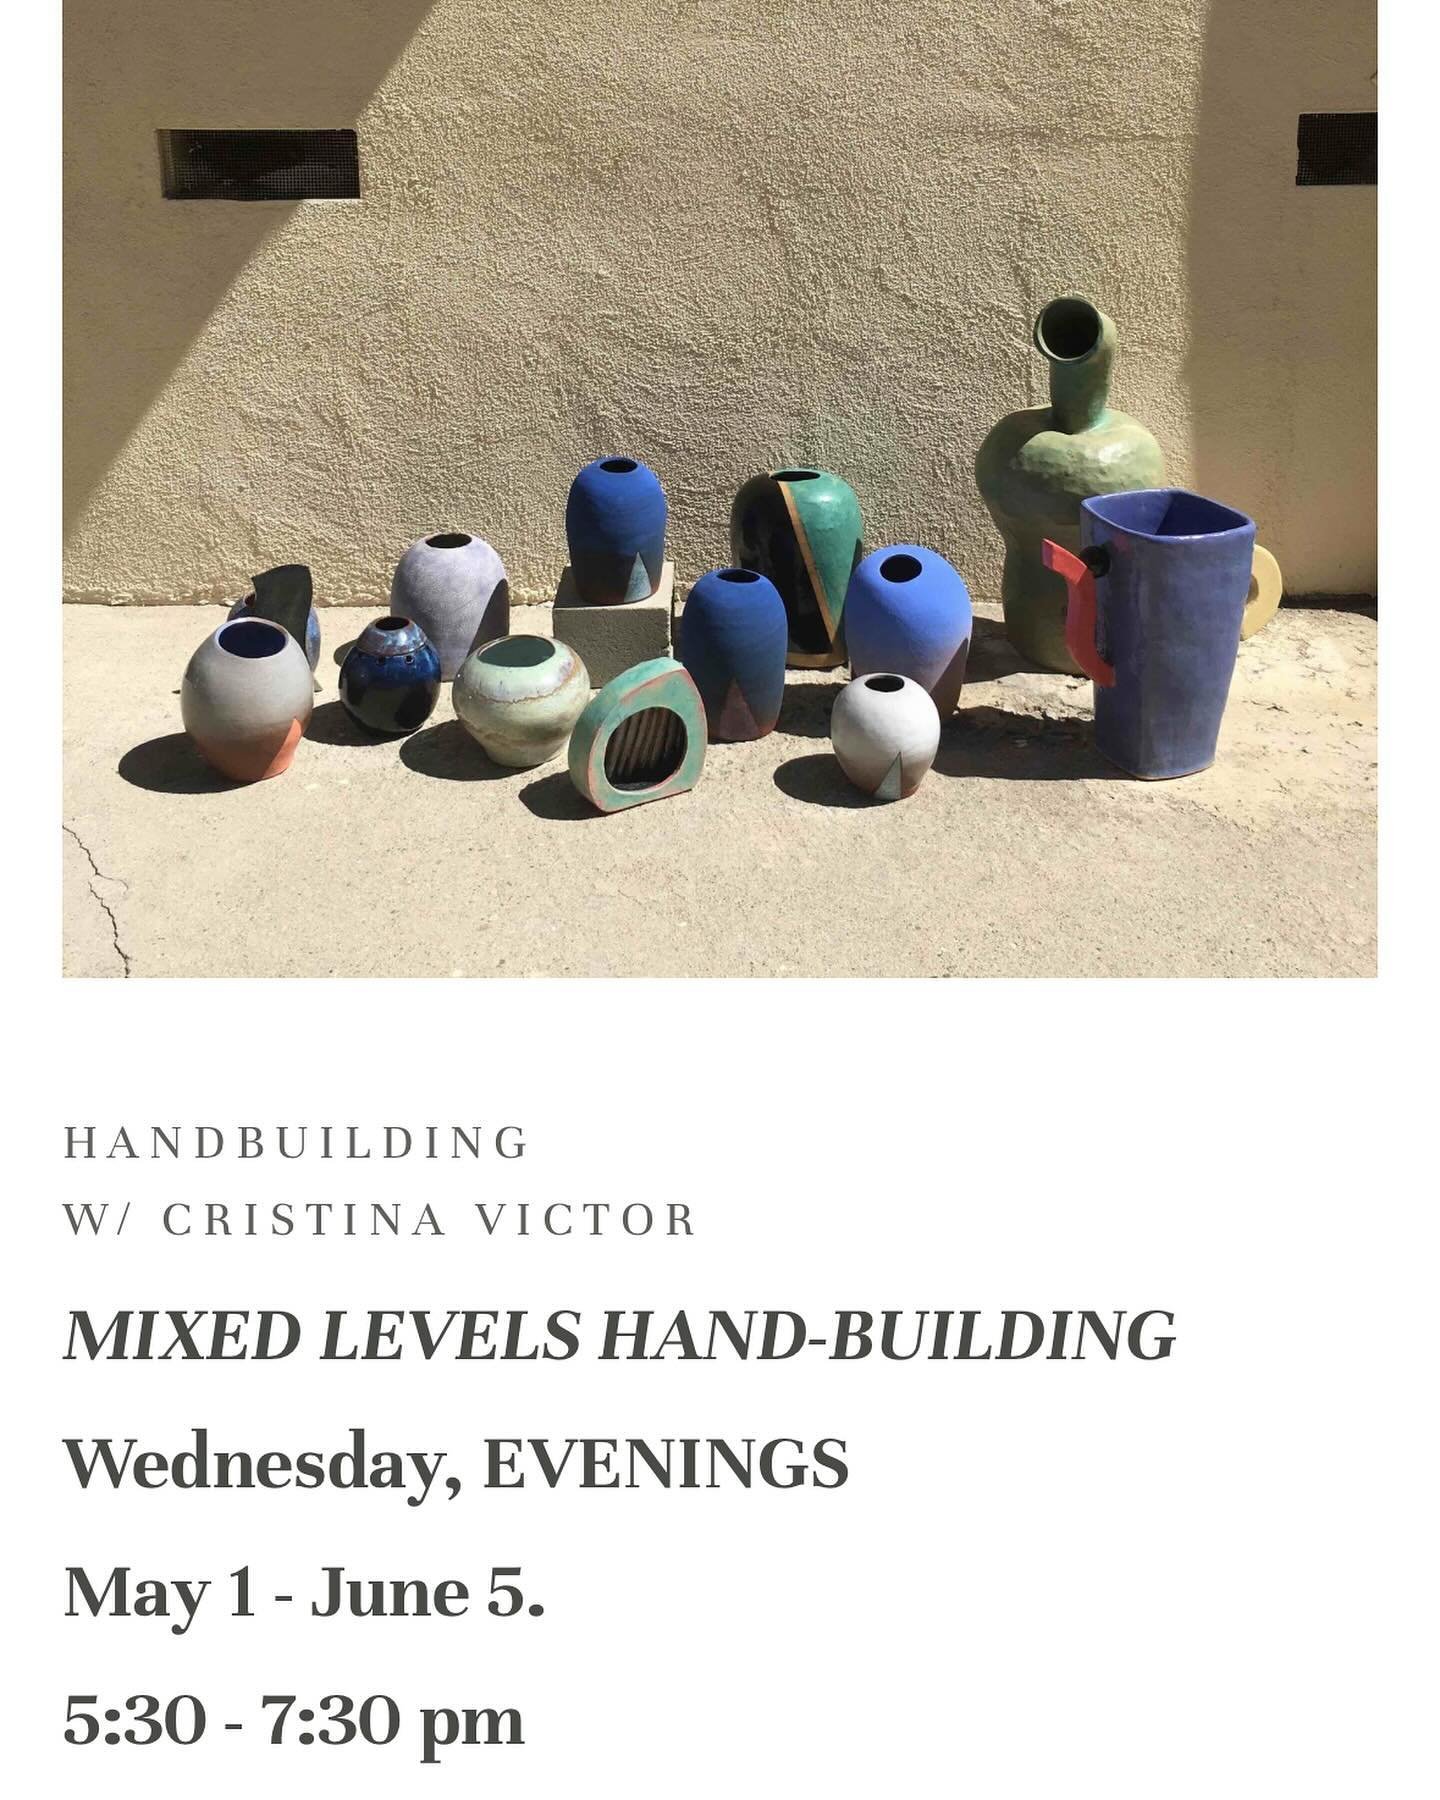 Next session of Hand-building with Cristina Victor begins Wednesday, May 1st!
If you&rsquo;re curious about what hand-building entails, here are some images of her current student work. So many possibilities! 
Registration in our stories ✨

@sabiacer